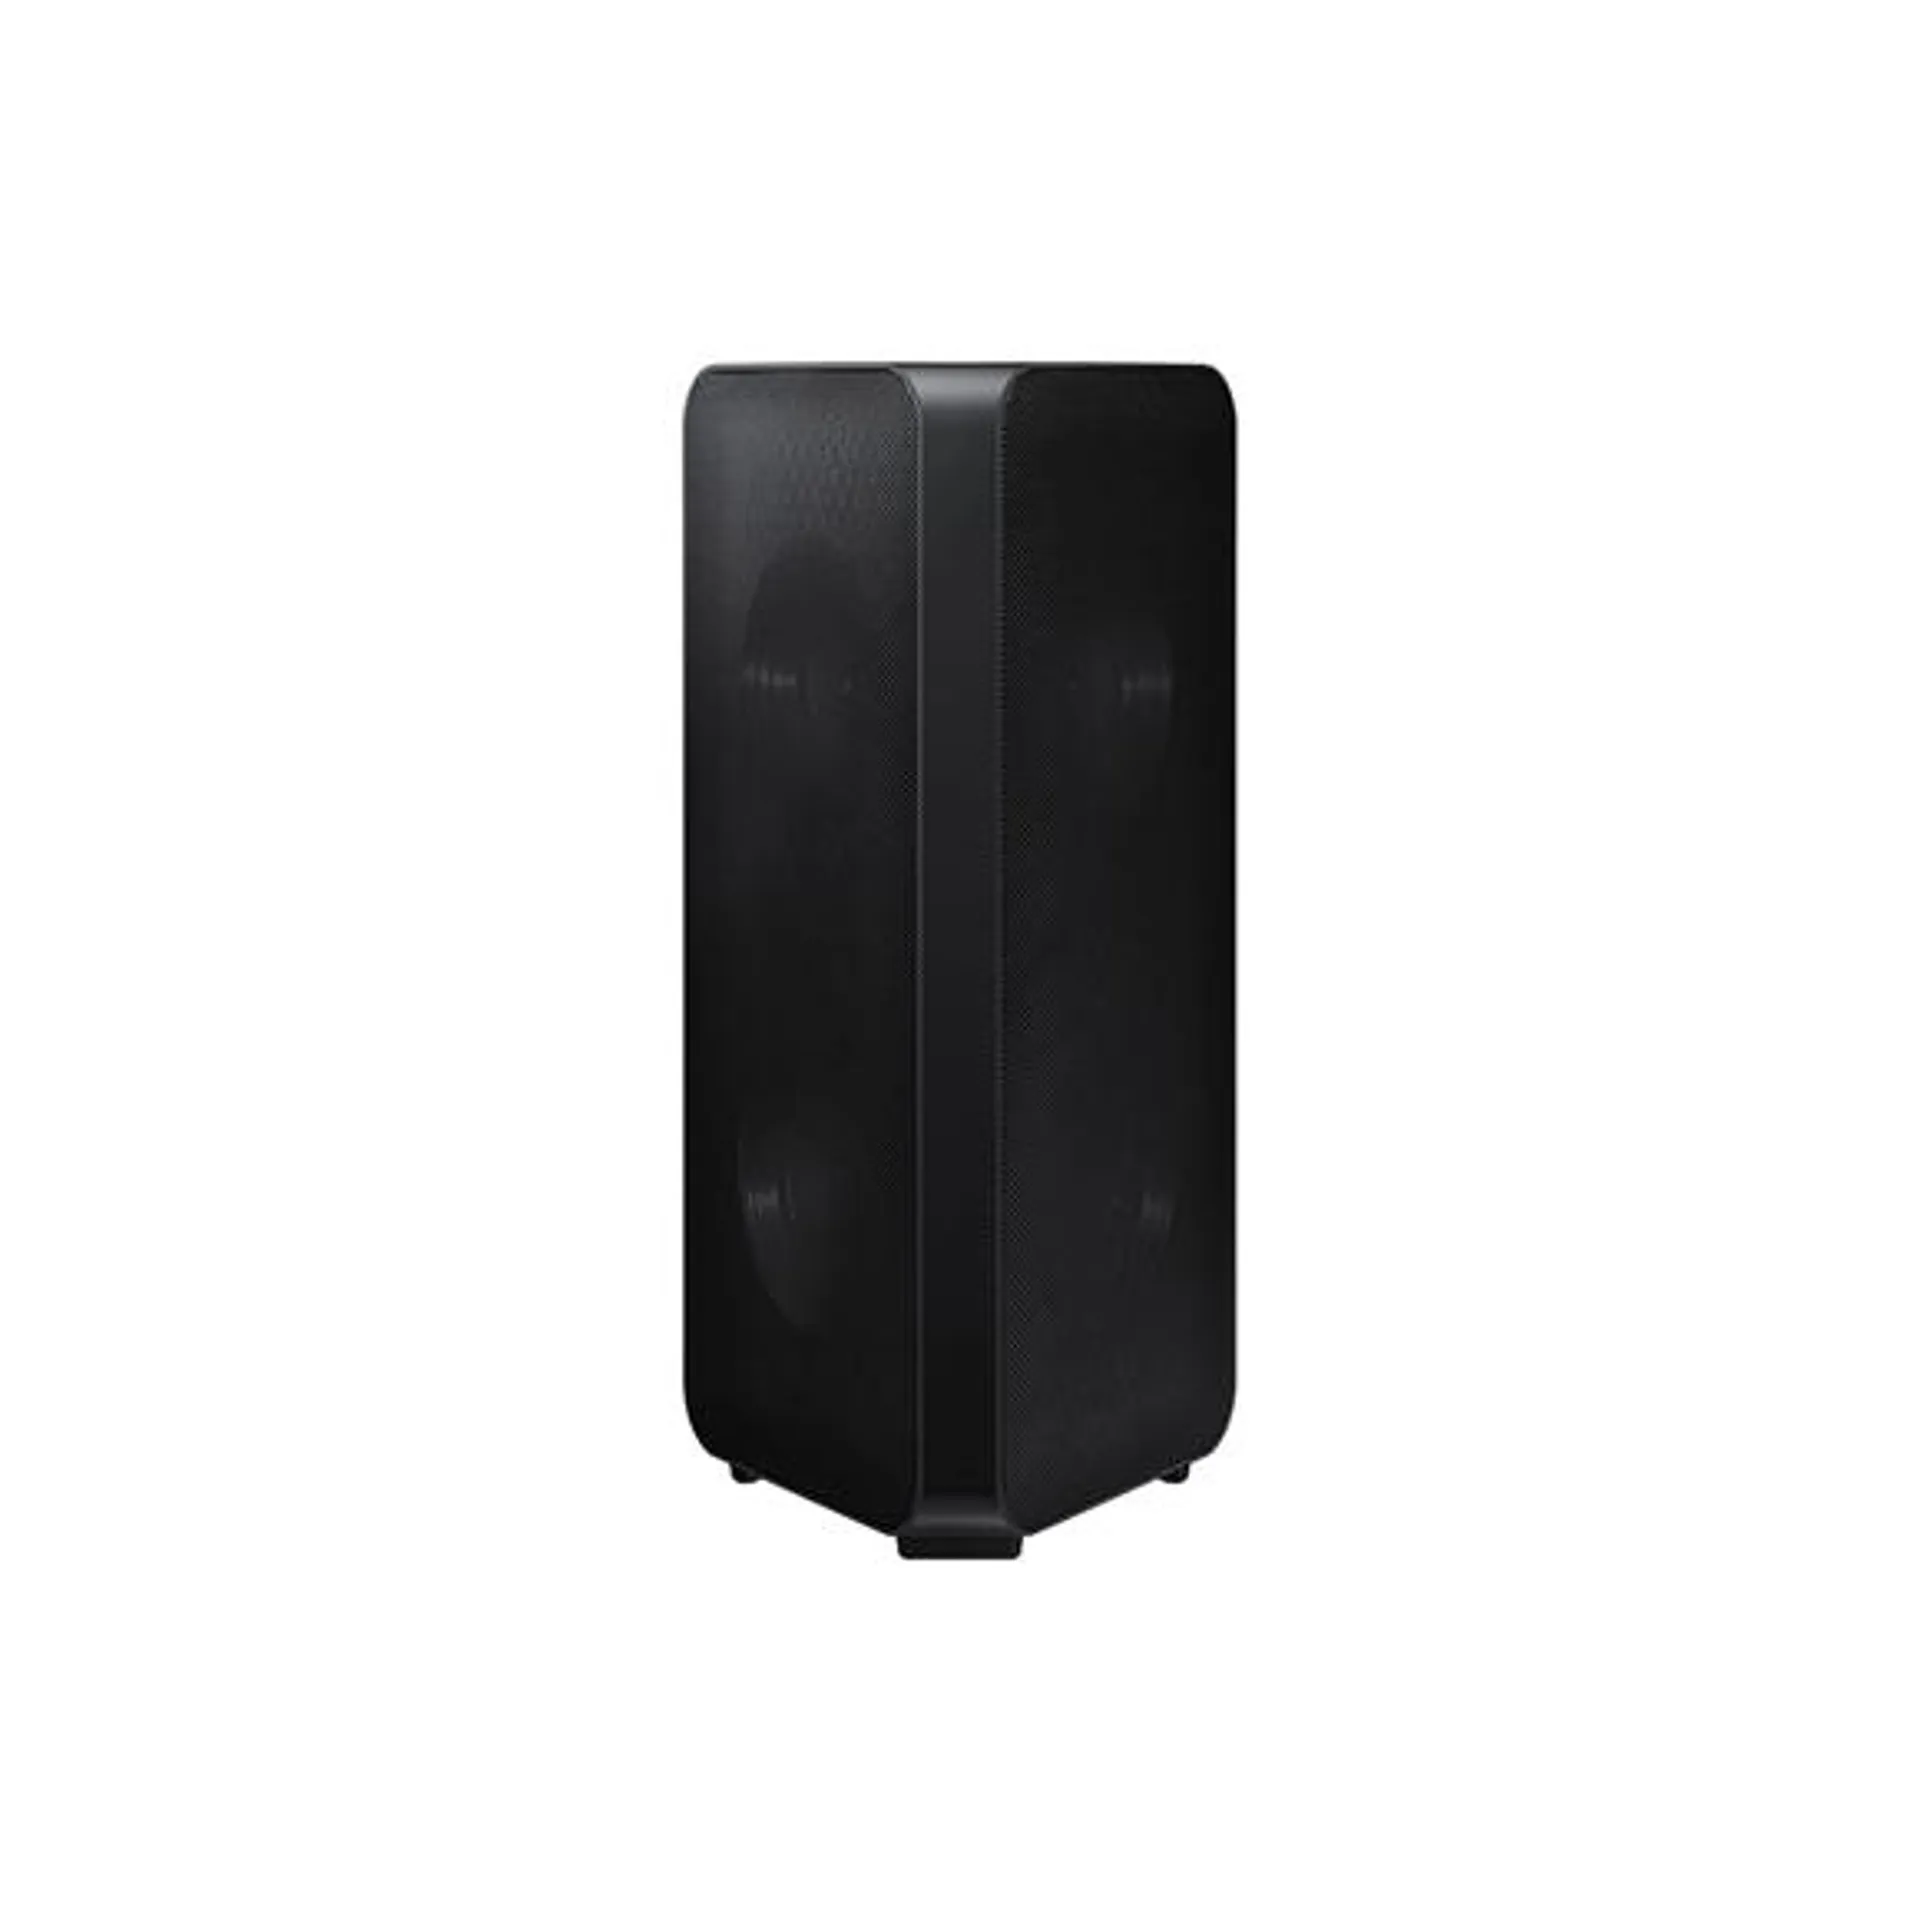 Smart Sound Tower Wireless Bluetooth Speaker With Built-in Battery - Black